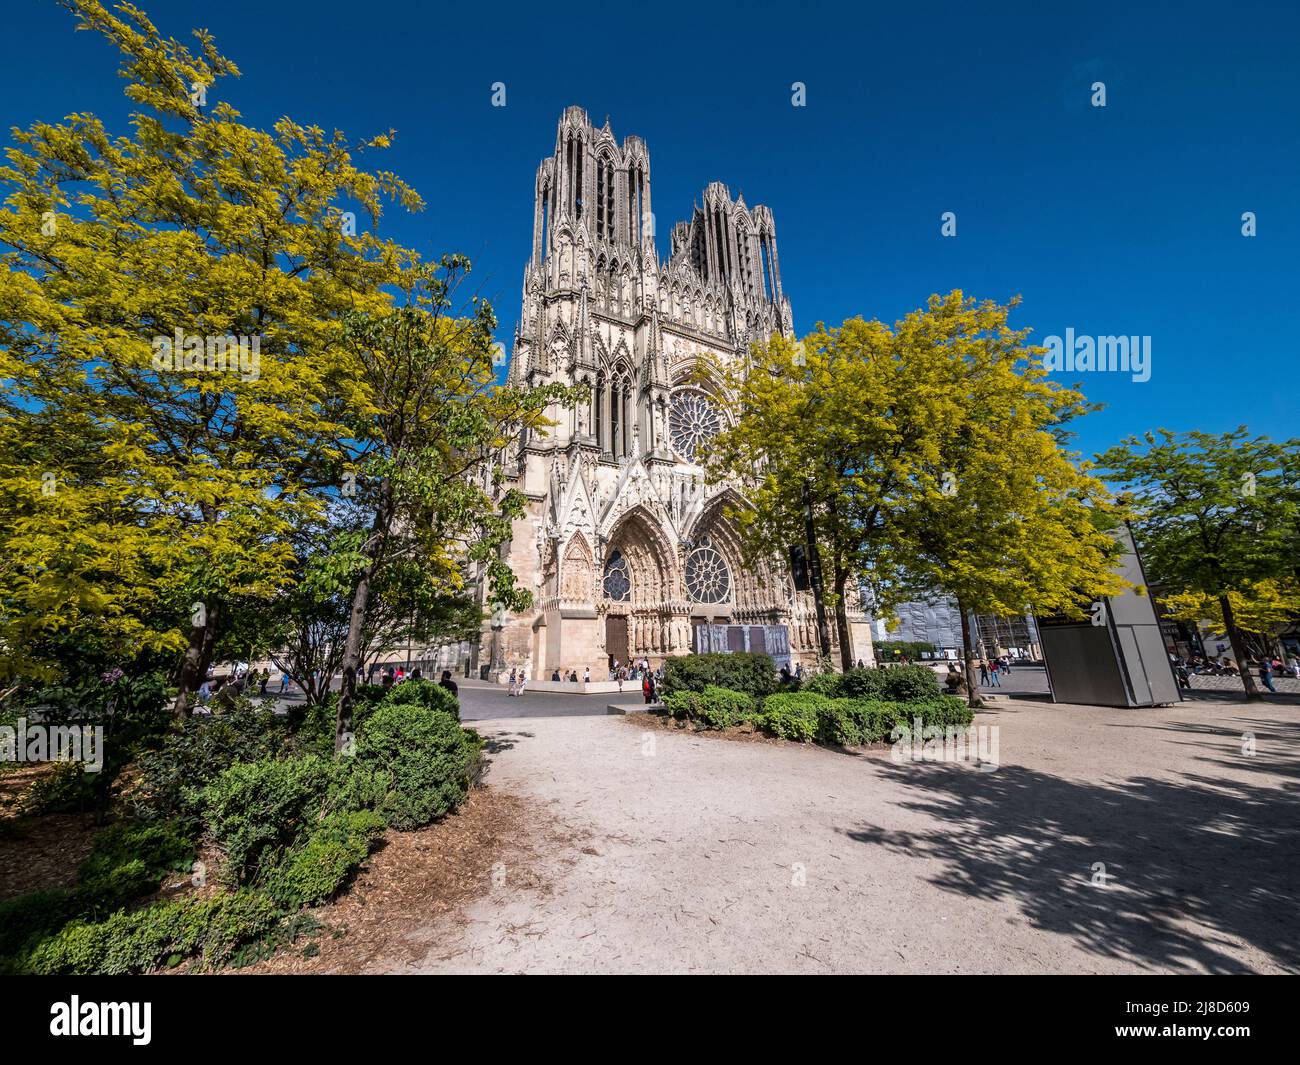 The image is of the famous 13th century Cathedral Notre Dame des Reims famed for its association with Joan of Arc, that overlooks the city square. Stock Photo